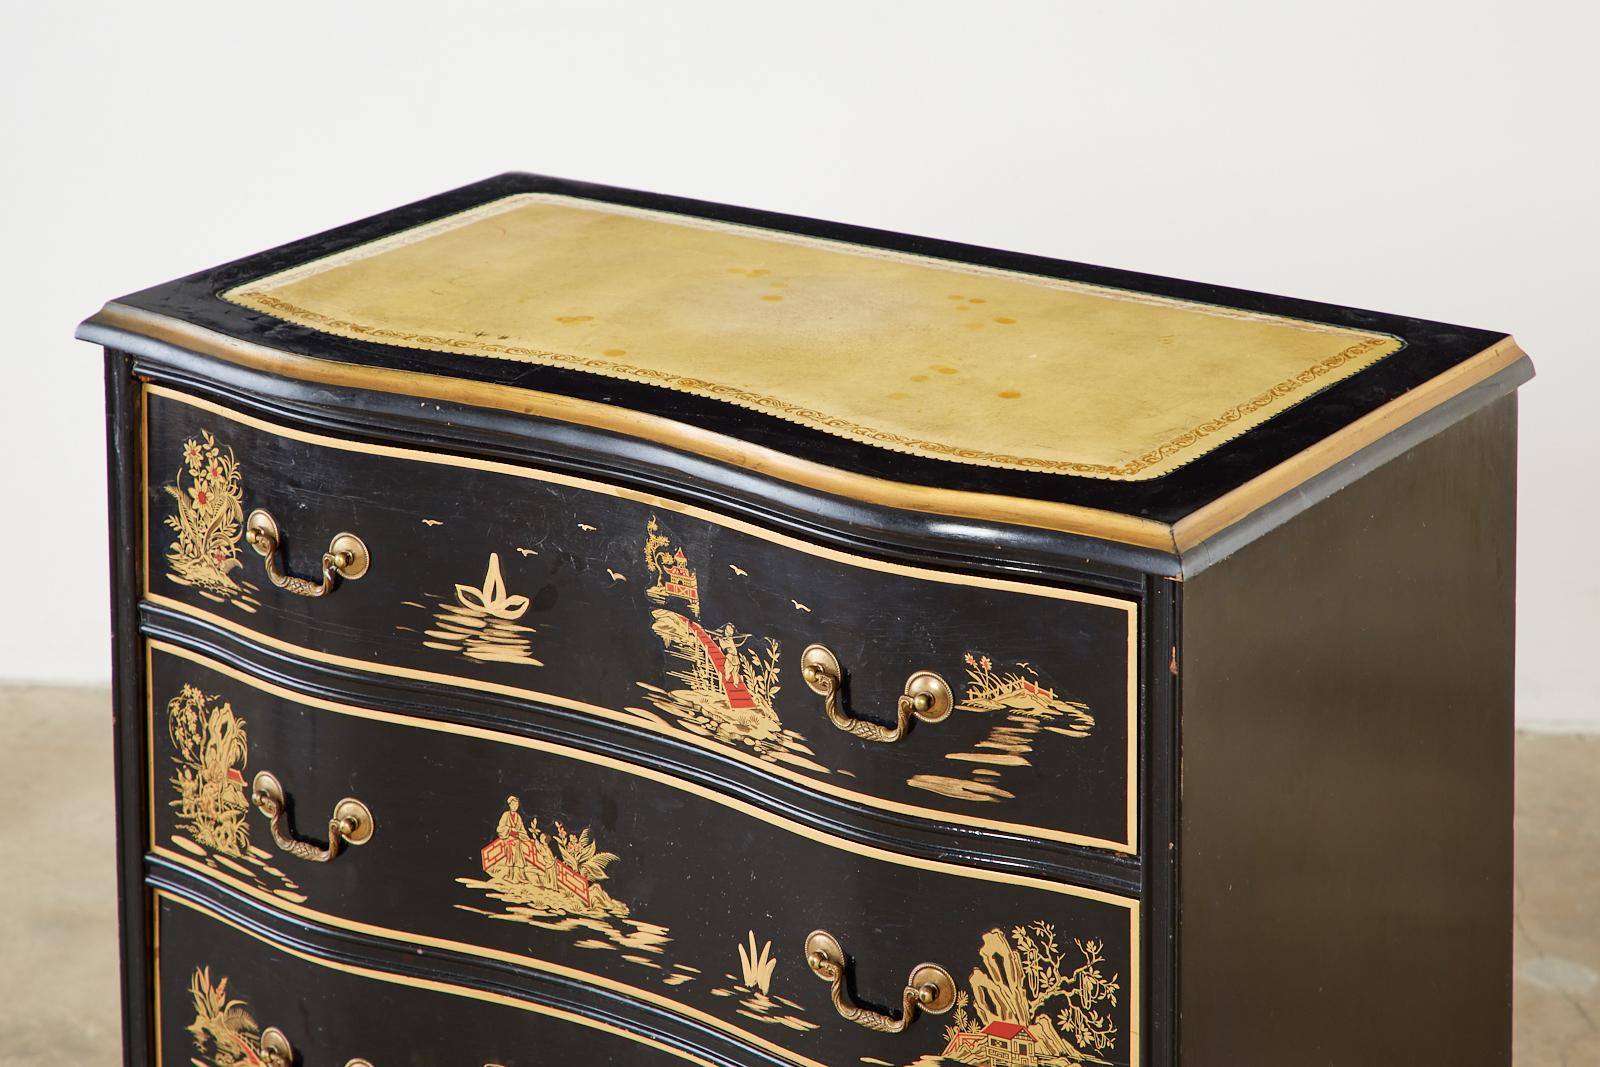 American English Regency Style Chinoiserie Decorated Commode or Chest